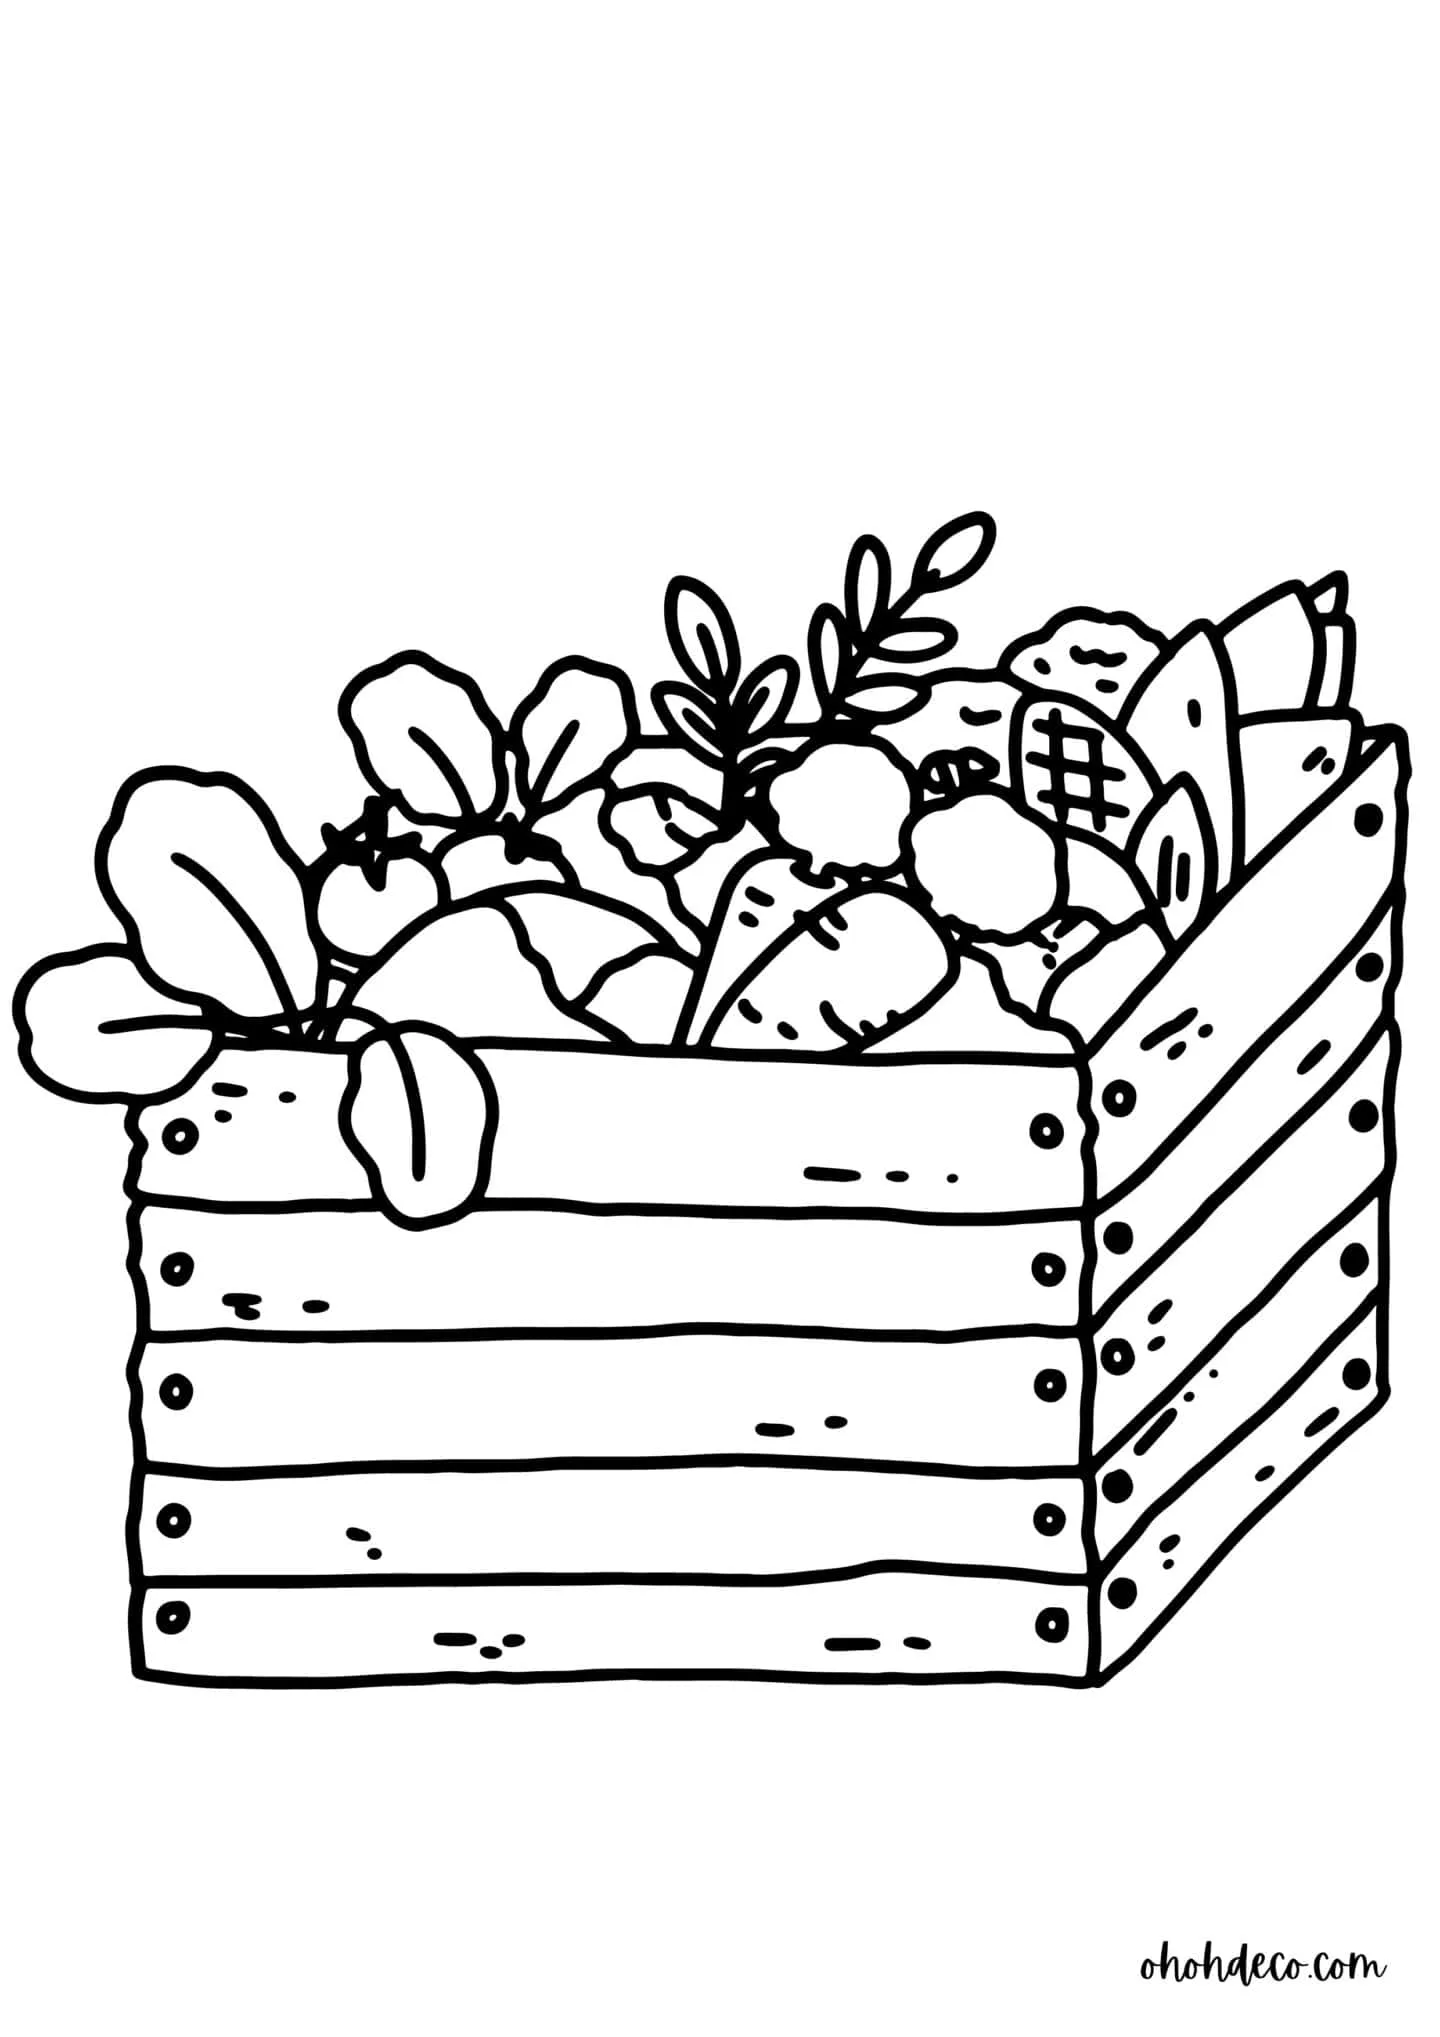 vegetable crate drawing